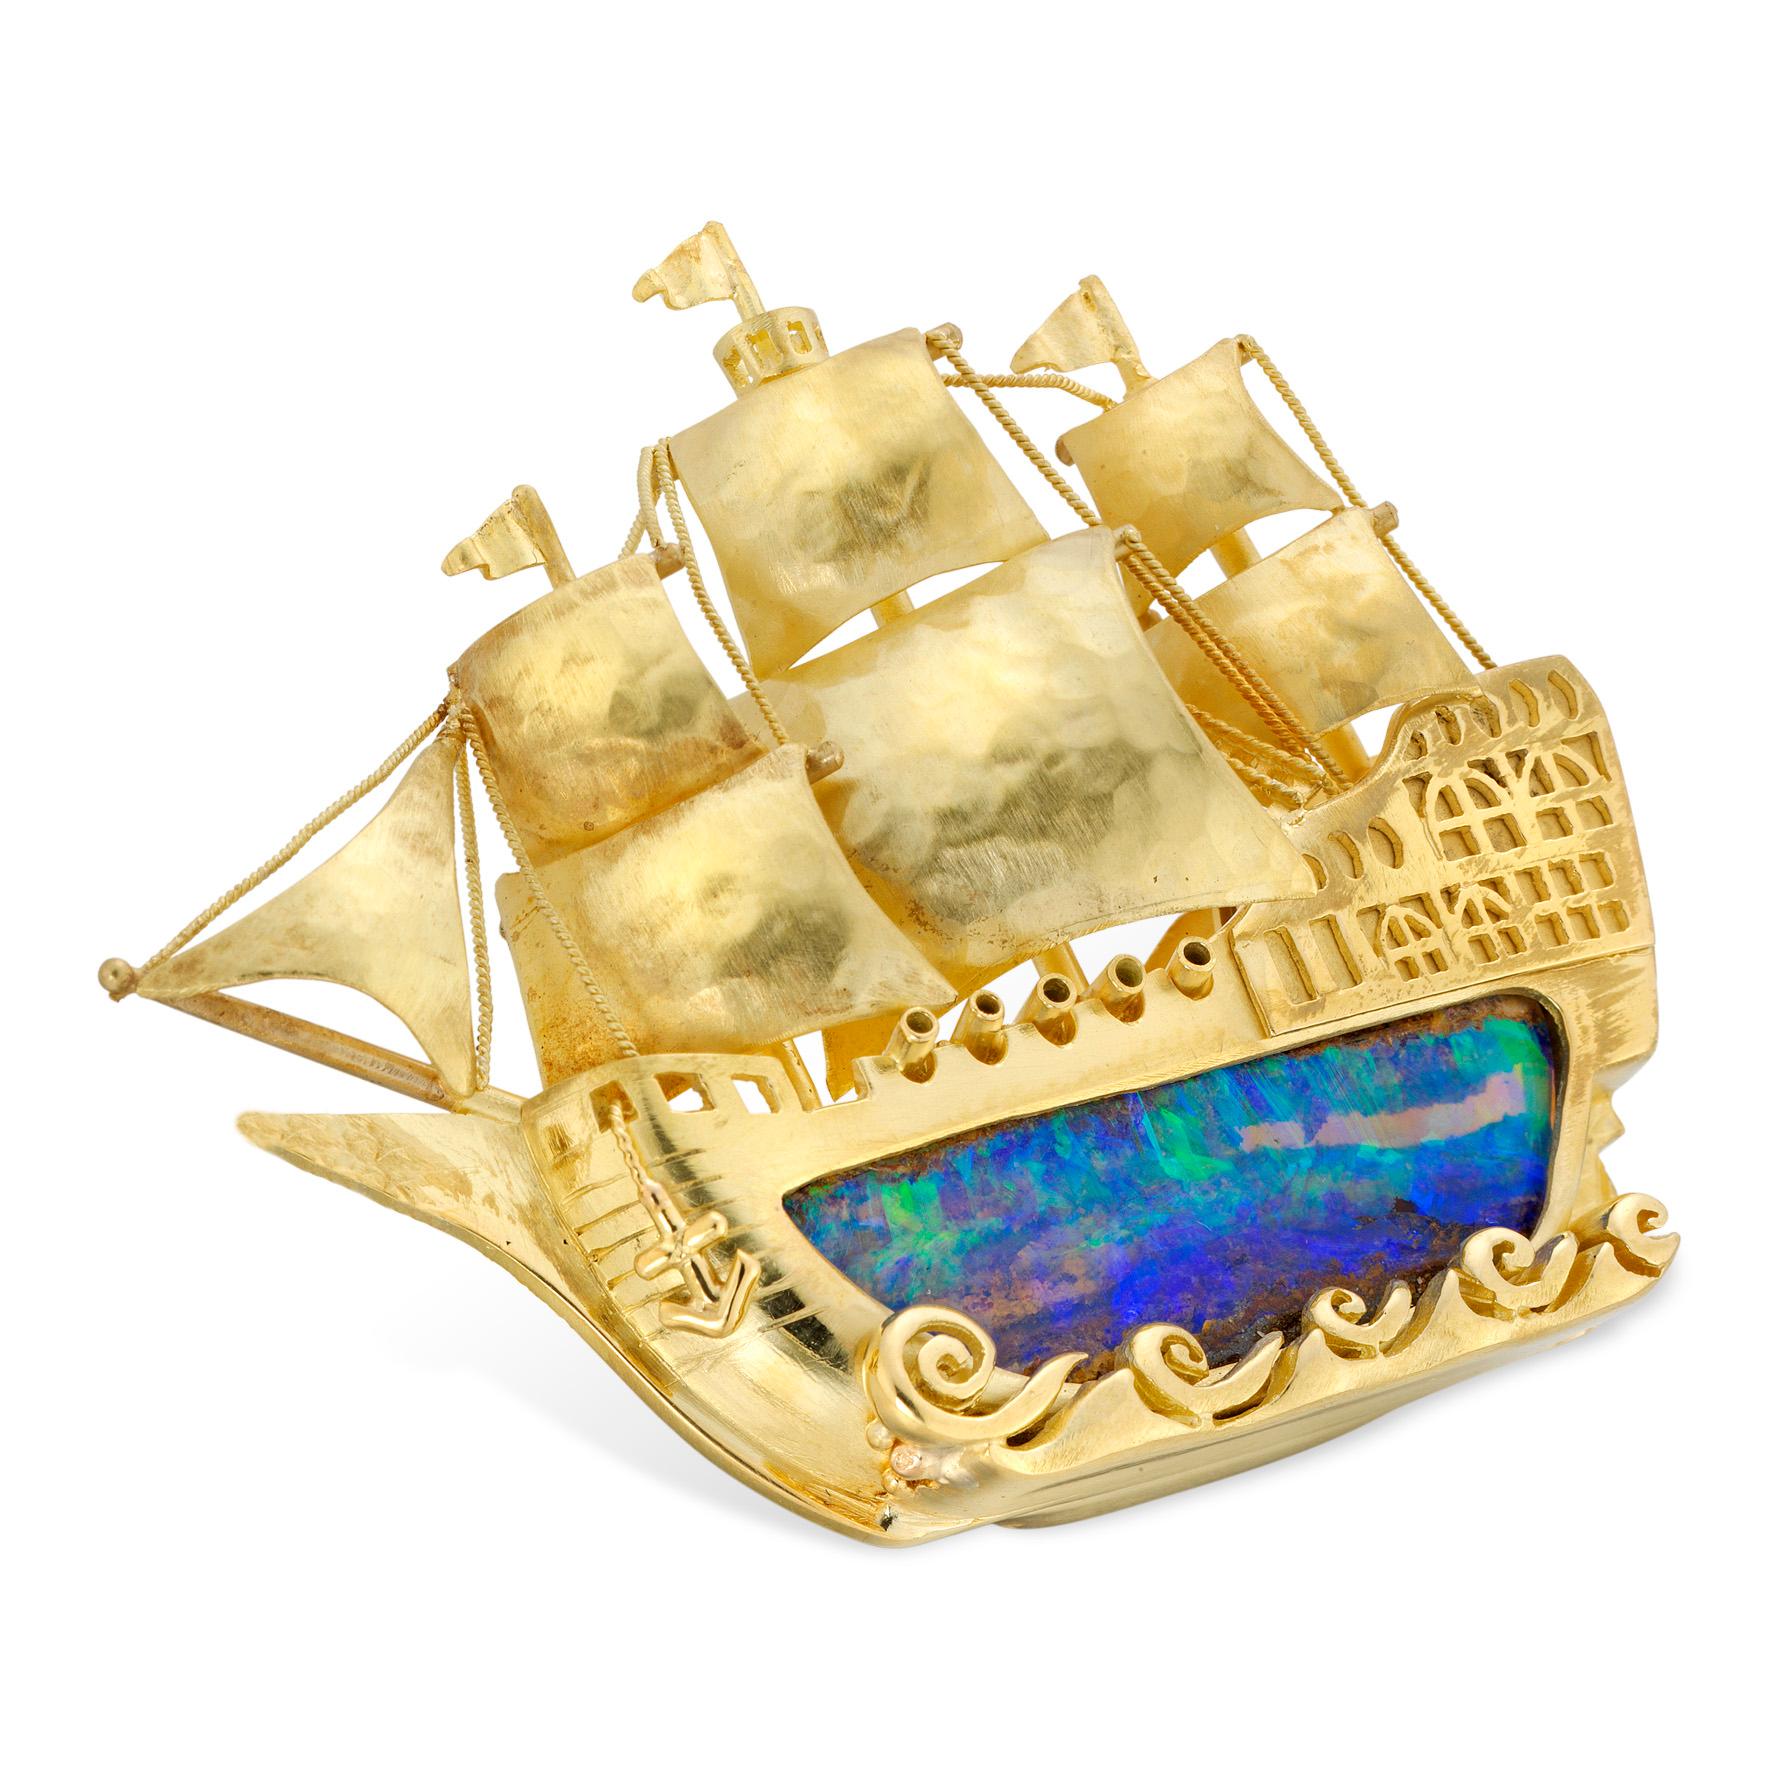 A gold and opal galleon made by Bentley & Skinner, the galleon in full sail consisting of hull set with boulder opal weighing 21.53 carats and fine gold sails and ropes, with stylised waves at the bottom, all mounted in yellow gold, hallmarked 18ct